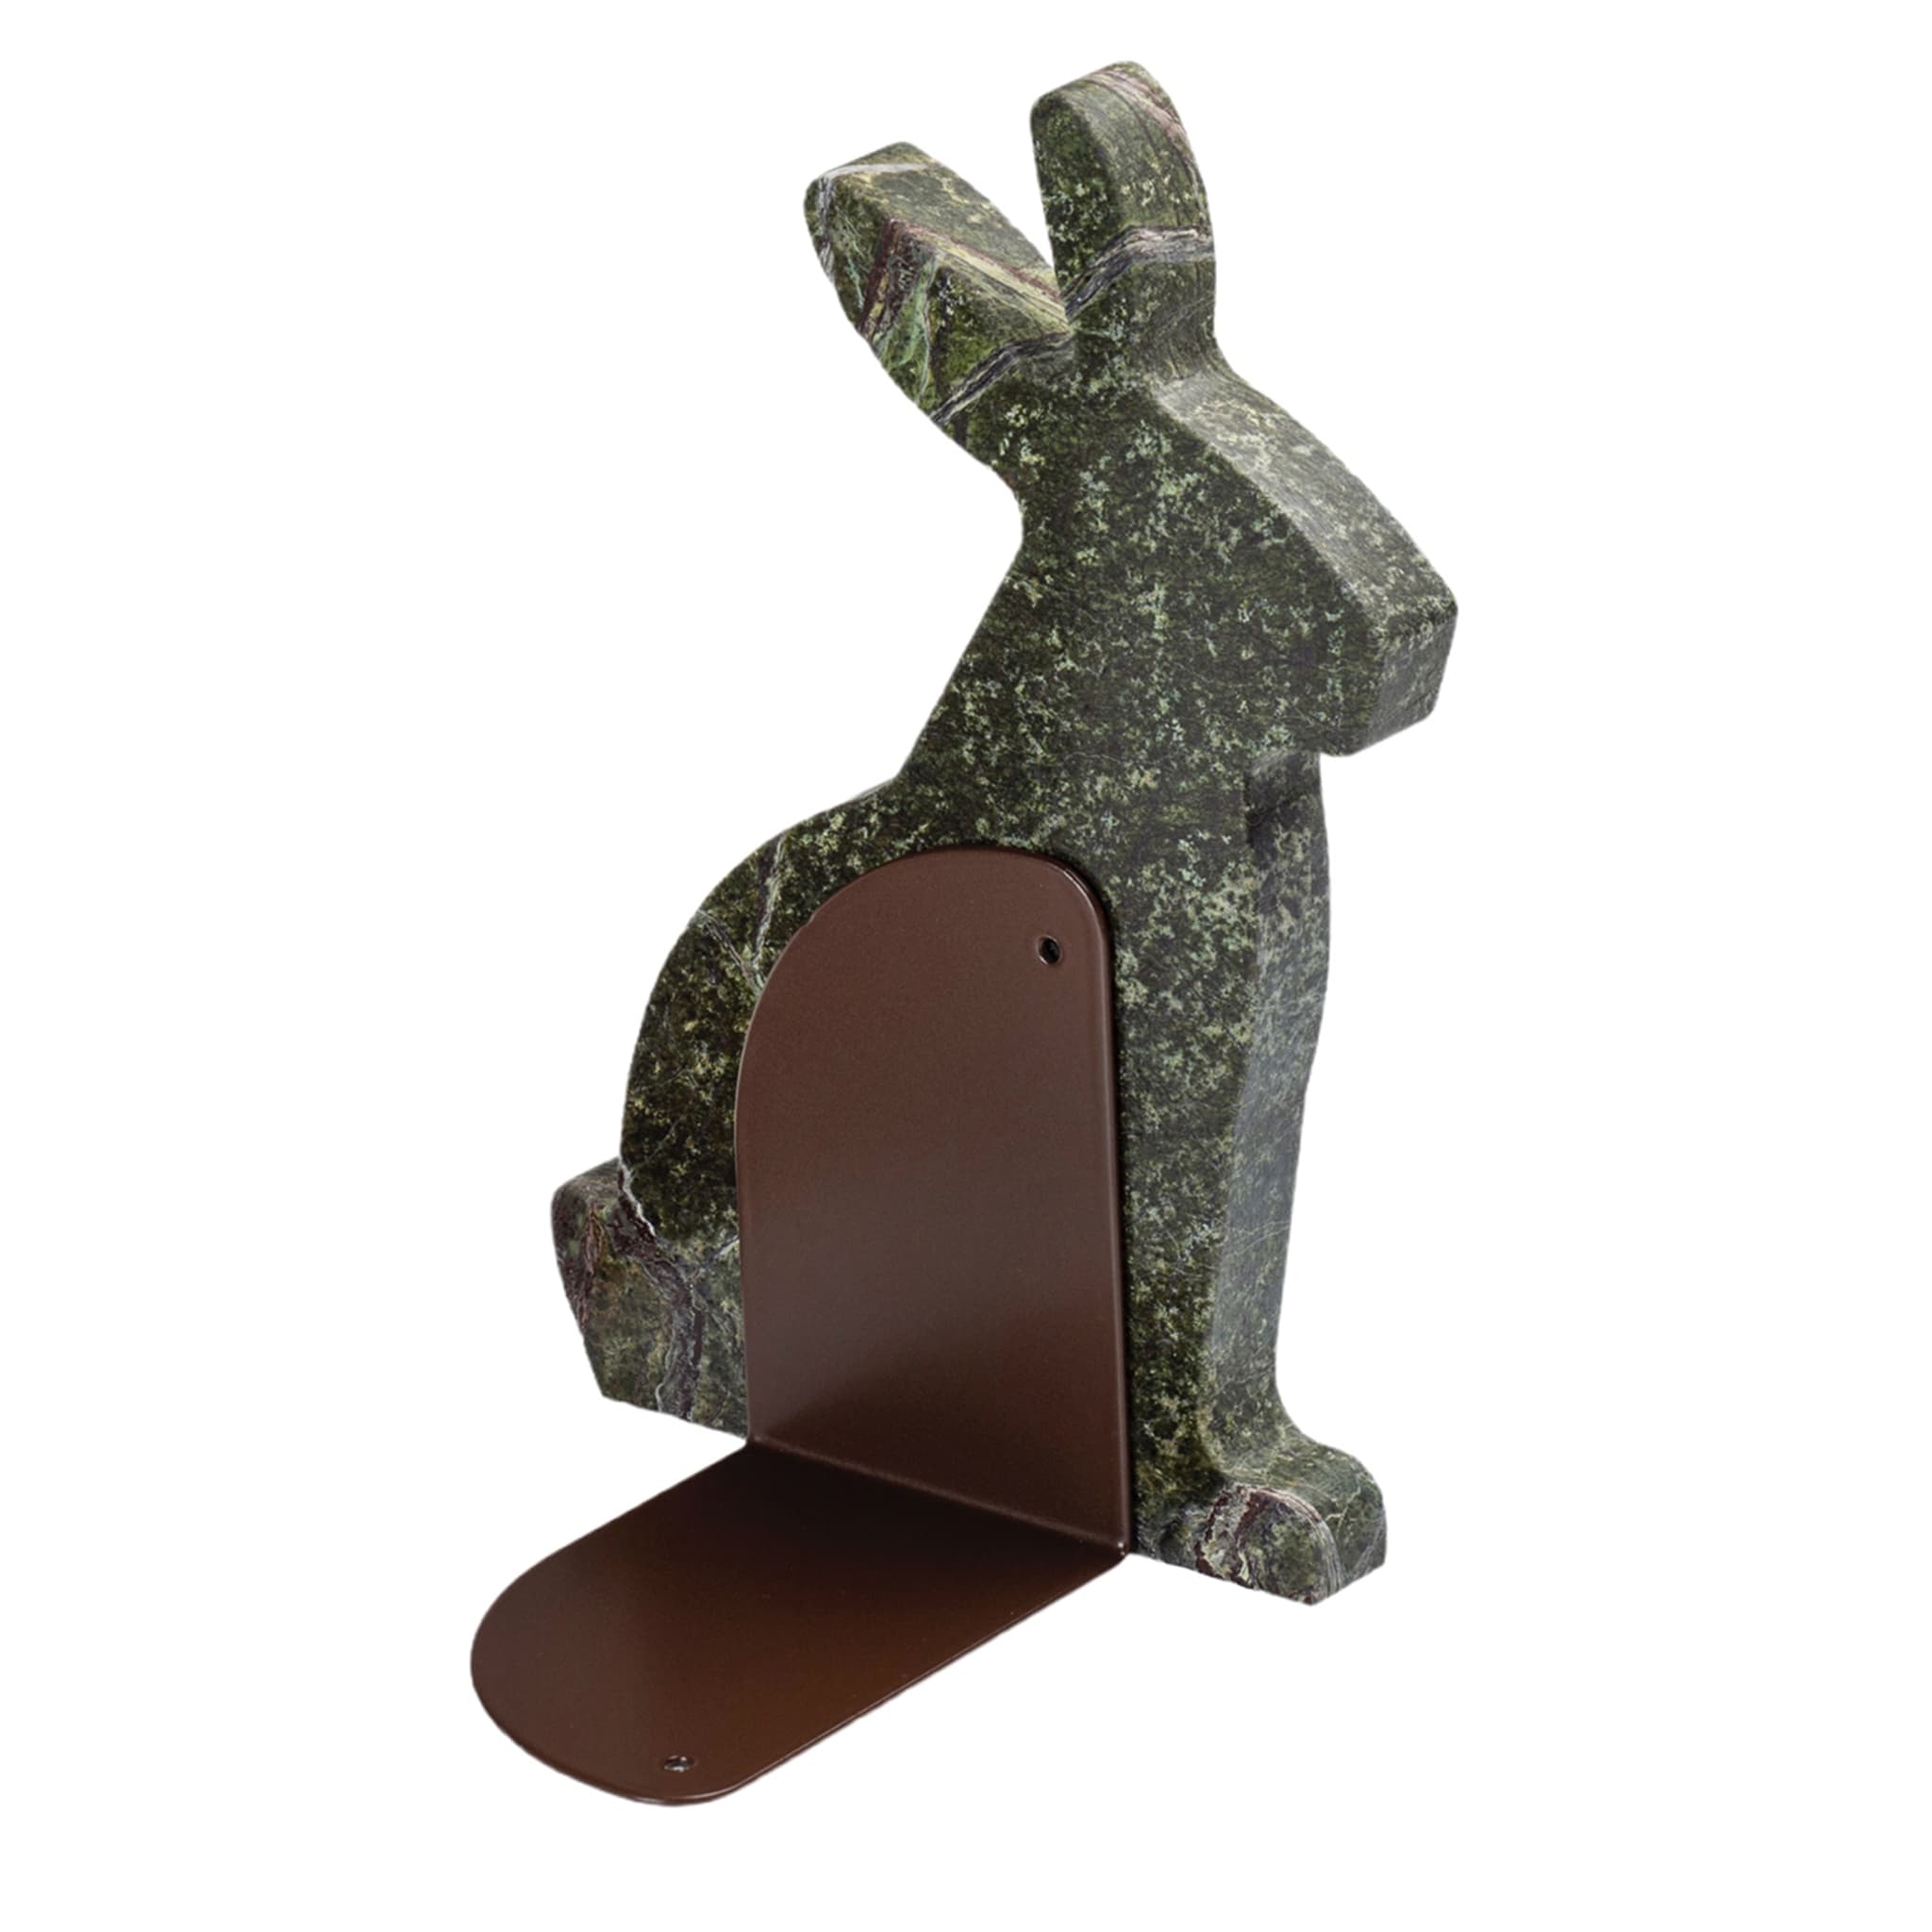 Bunny Set of 2 Picasso Green Bookends by Alessandra Grasso - Alternative view 2